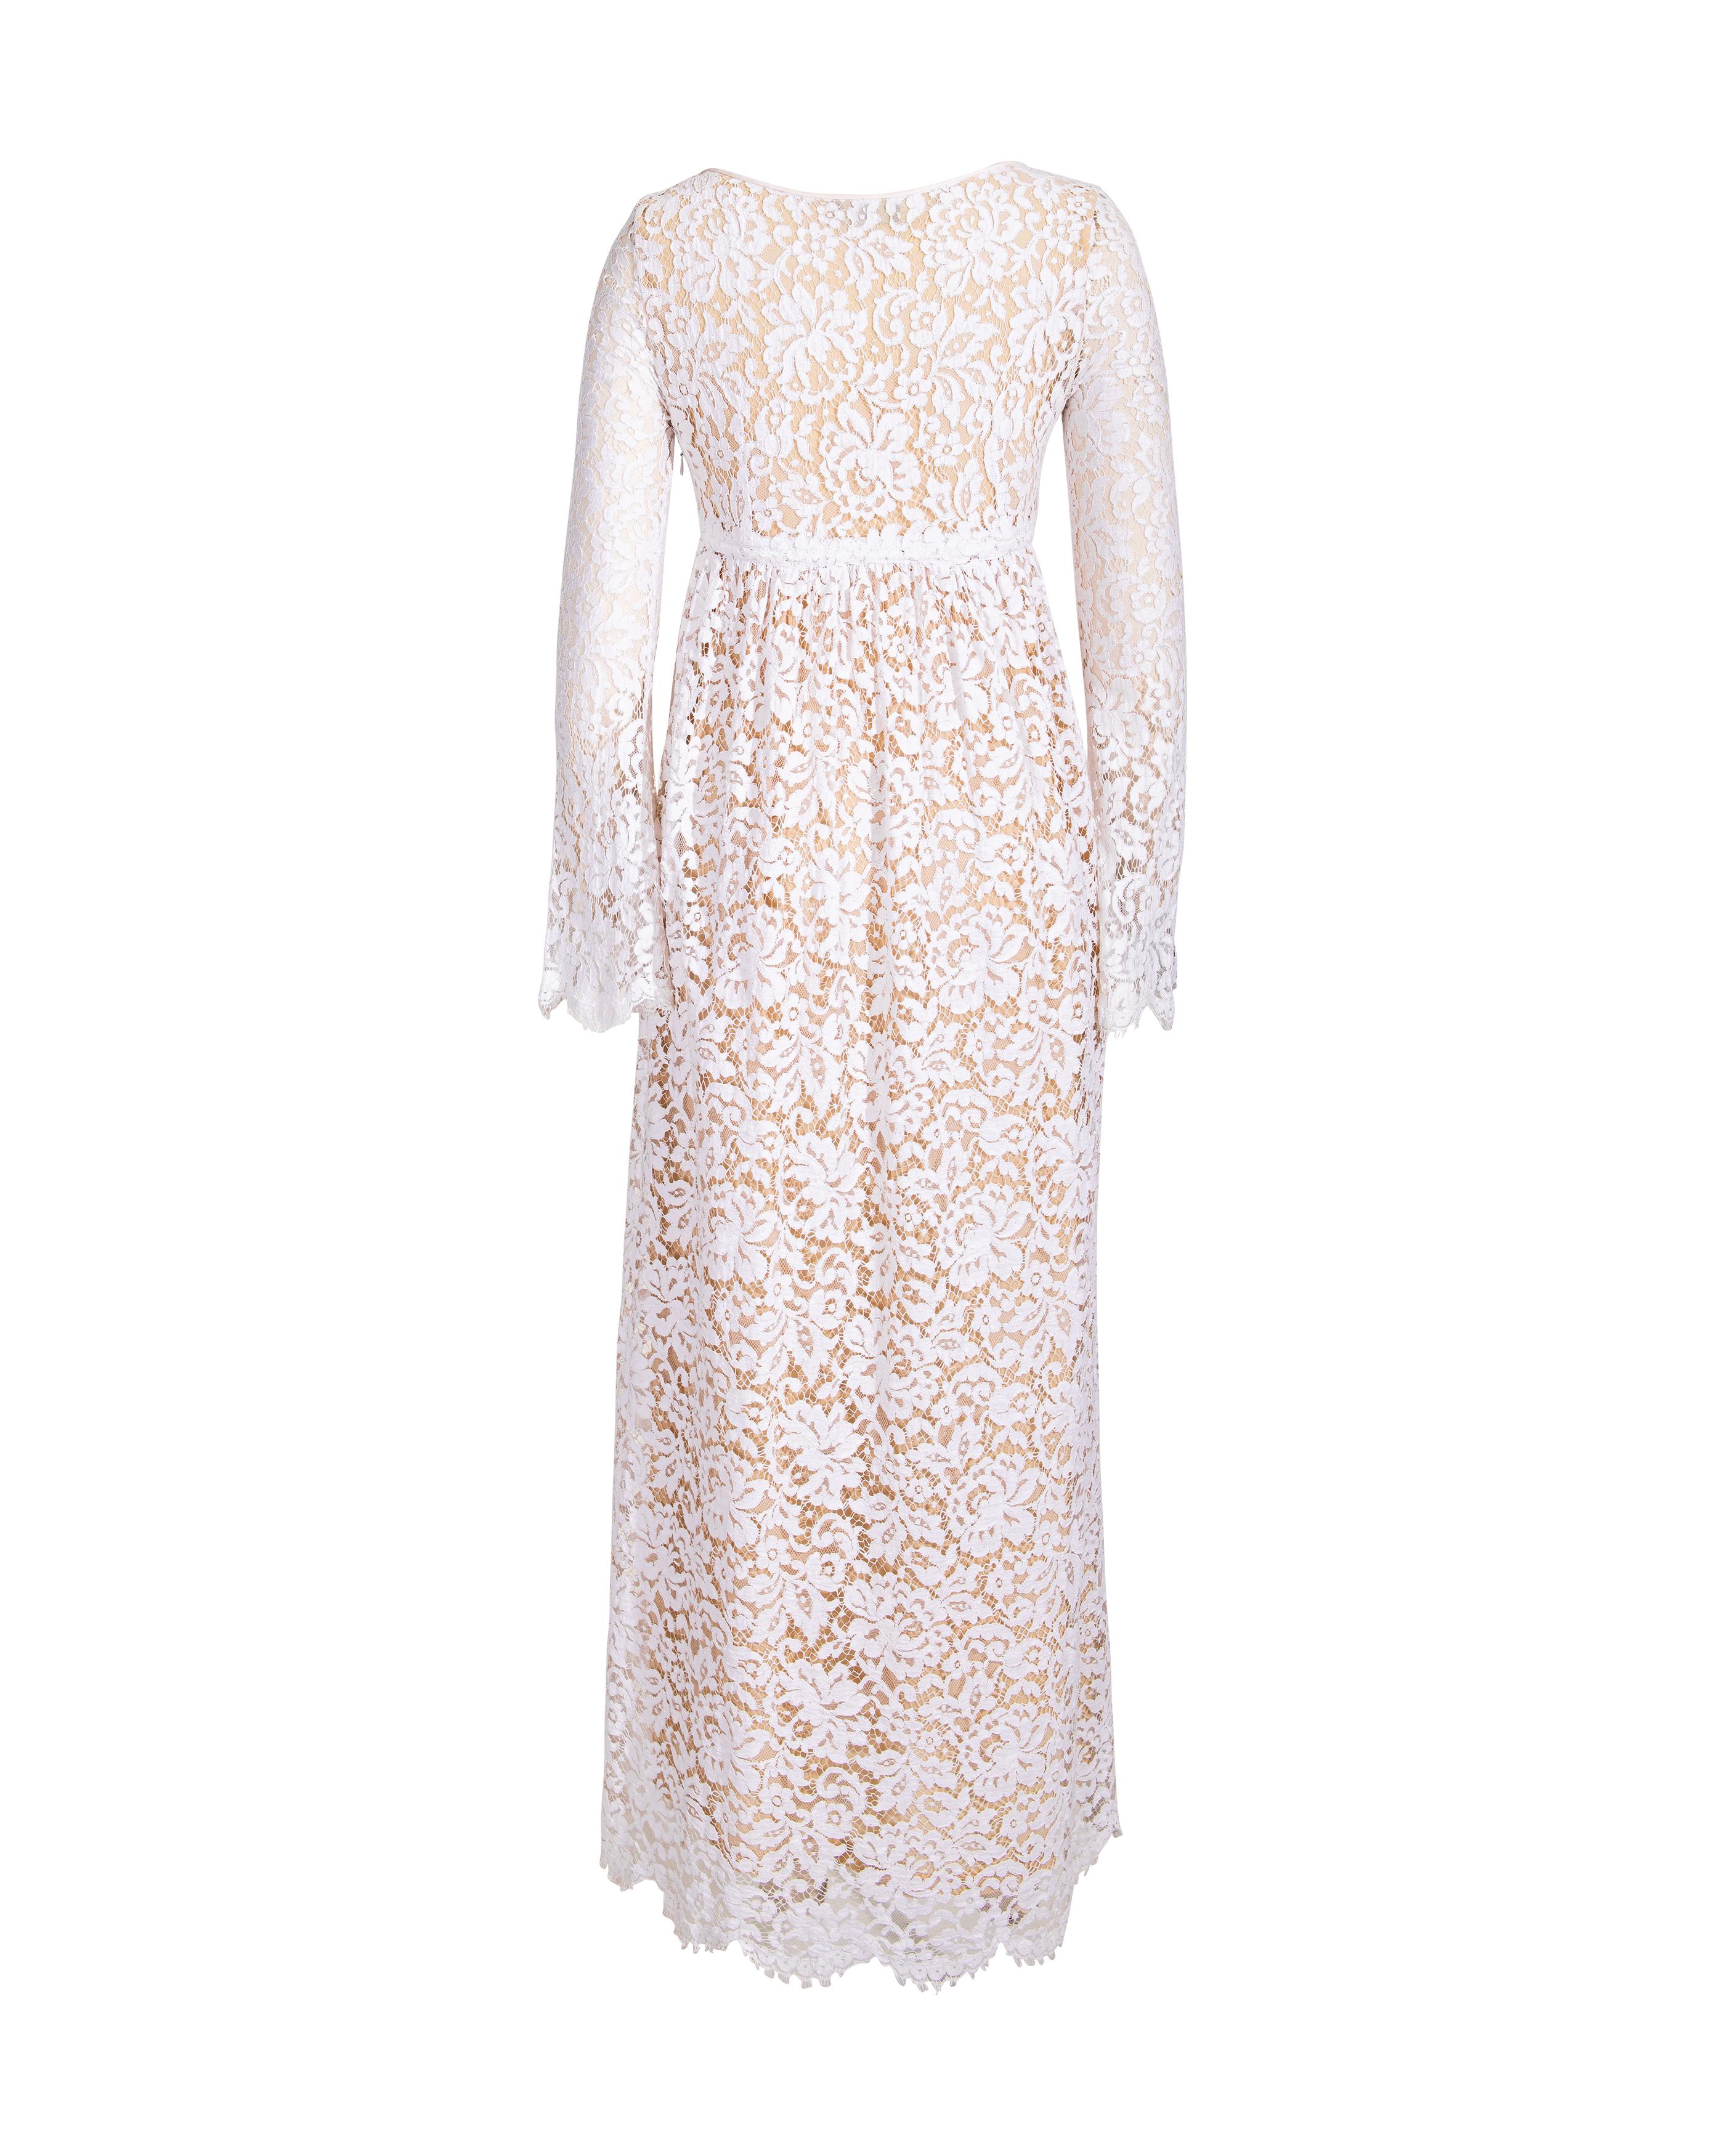 S/S 1996 Gucci by Tom Ford White Lace Gown with Nude Lining 2